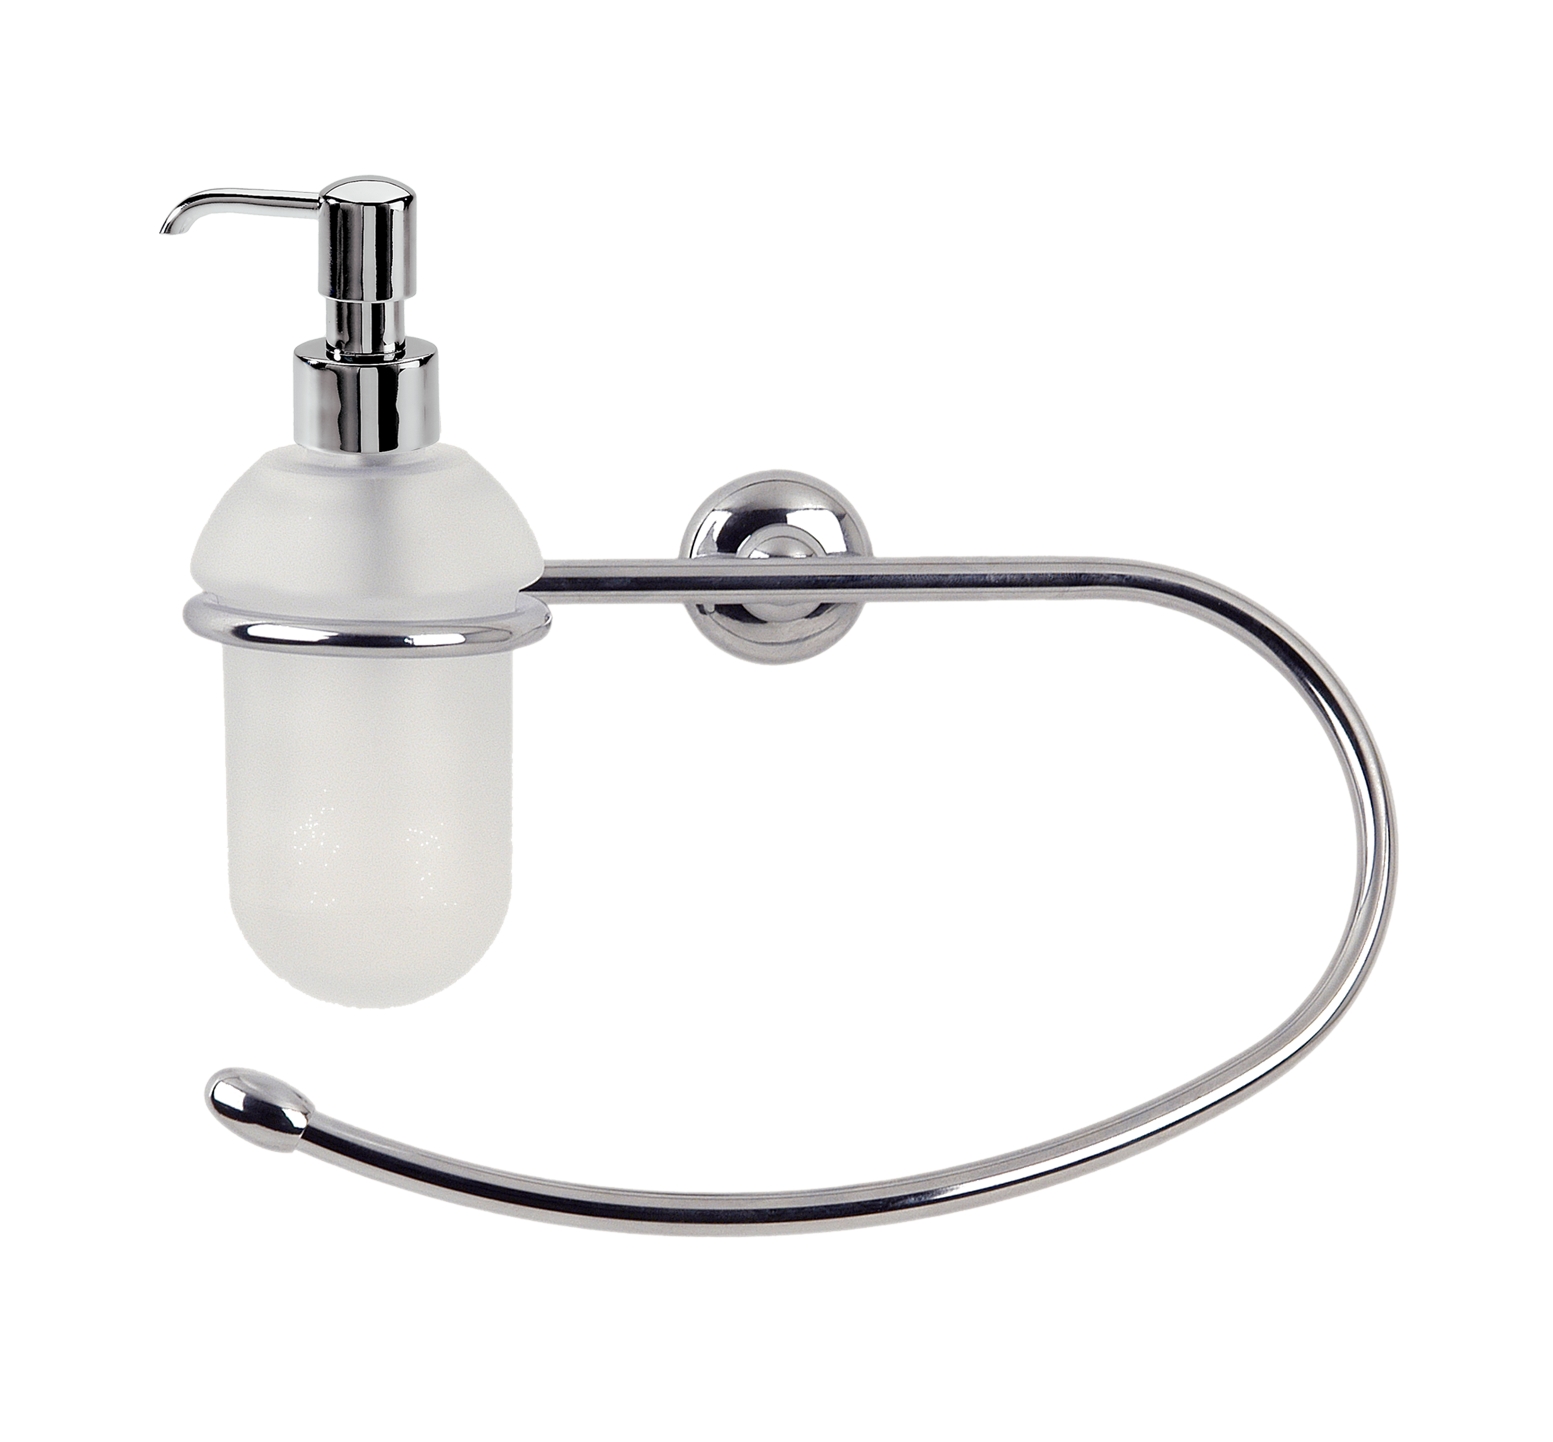 Bathroom accessory two functions, towel rack and soap dispenser - WAVE LINE